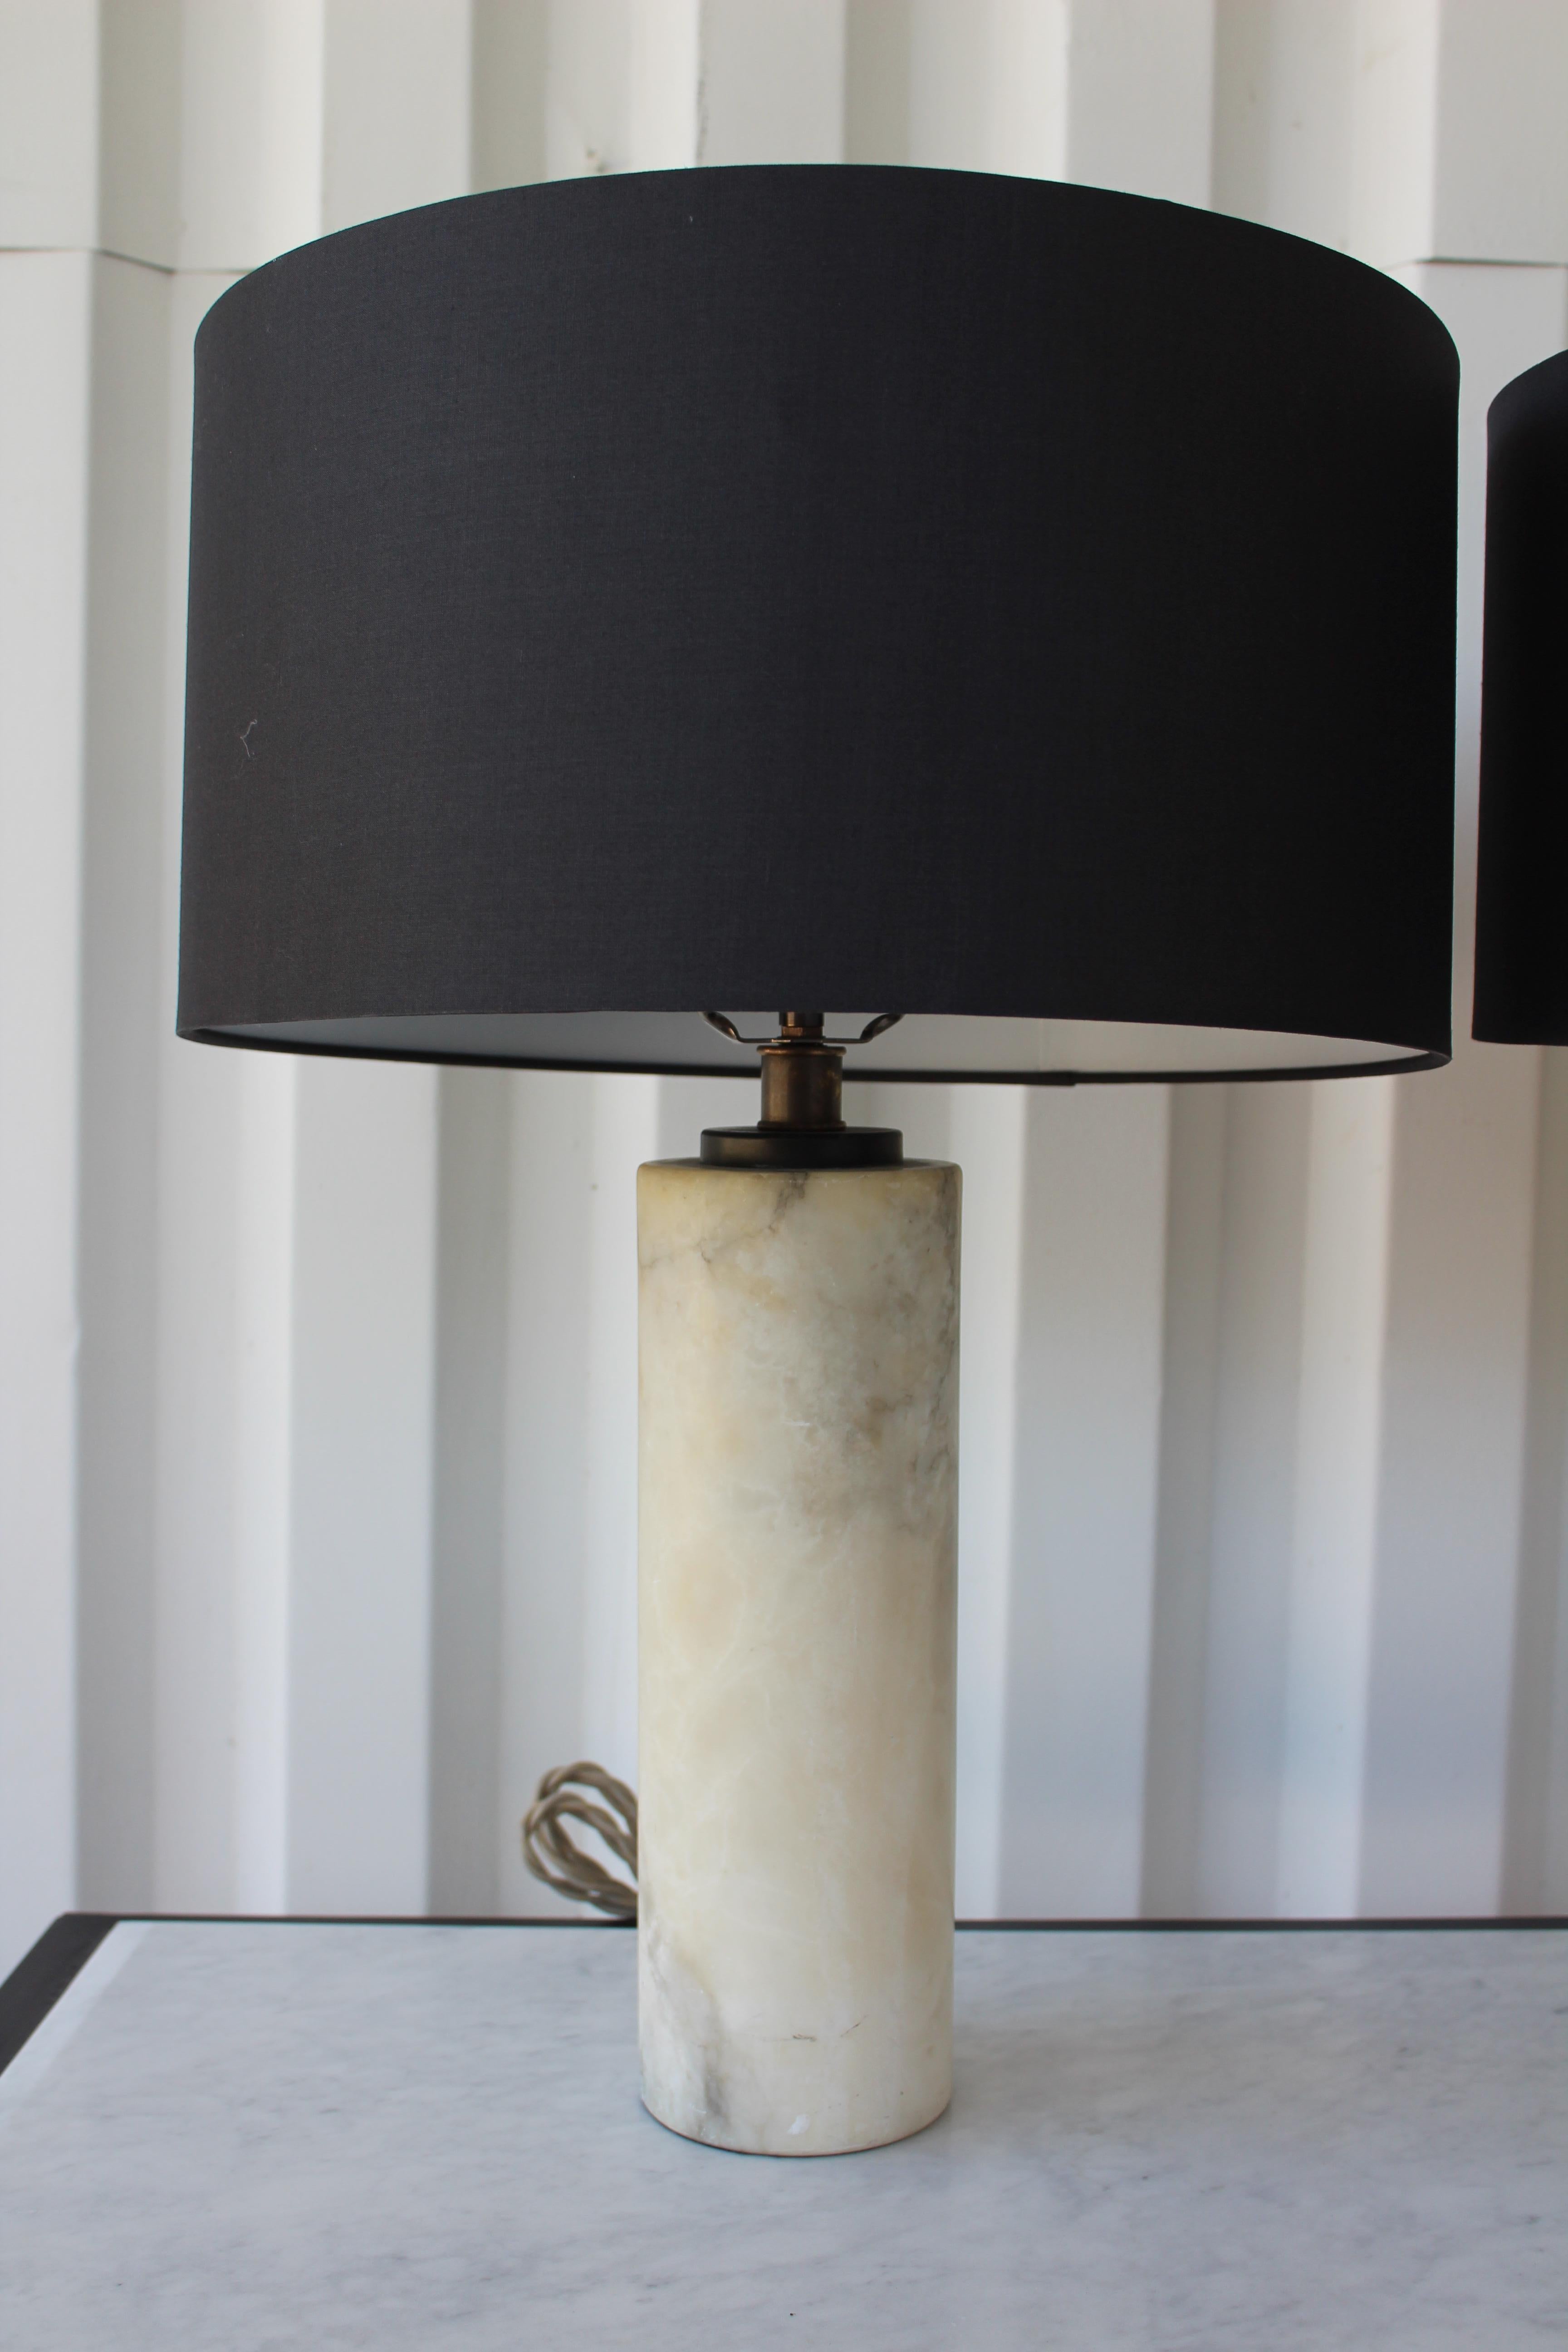 Pair of vintage midcentury marble lamps, Italy, 1950s. The pair have been rewired and include their custom made black silk shades. Sold separately.
Base is 4 inches diameter, shade is 15 inches diameter. Total height of 21 inches.